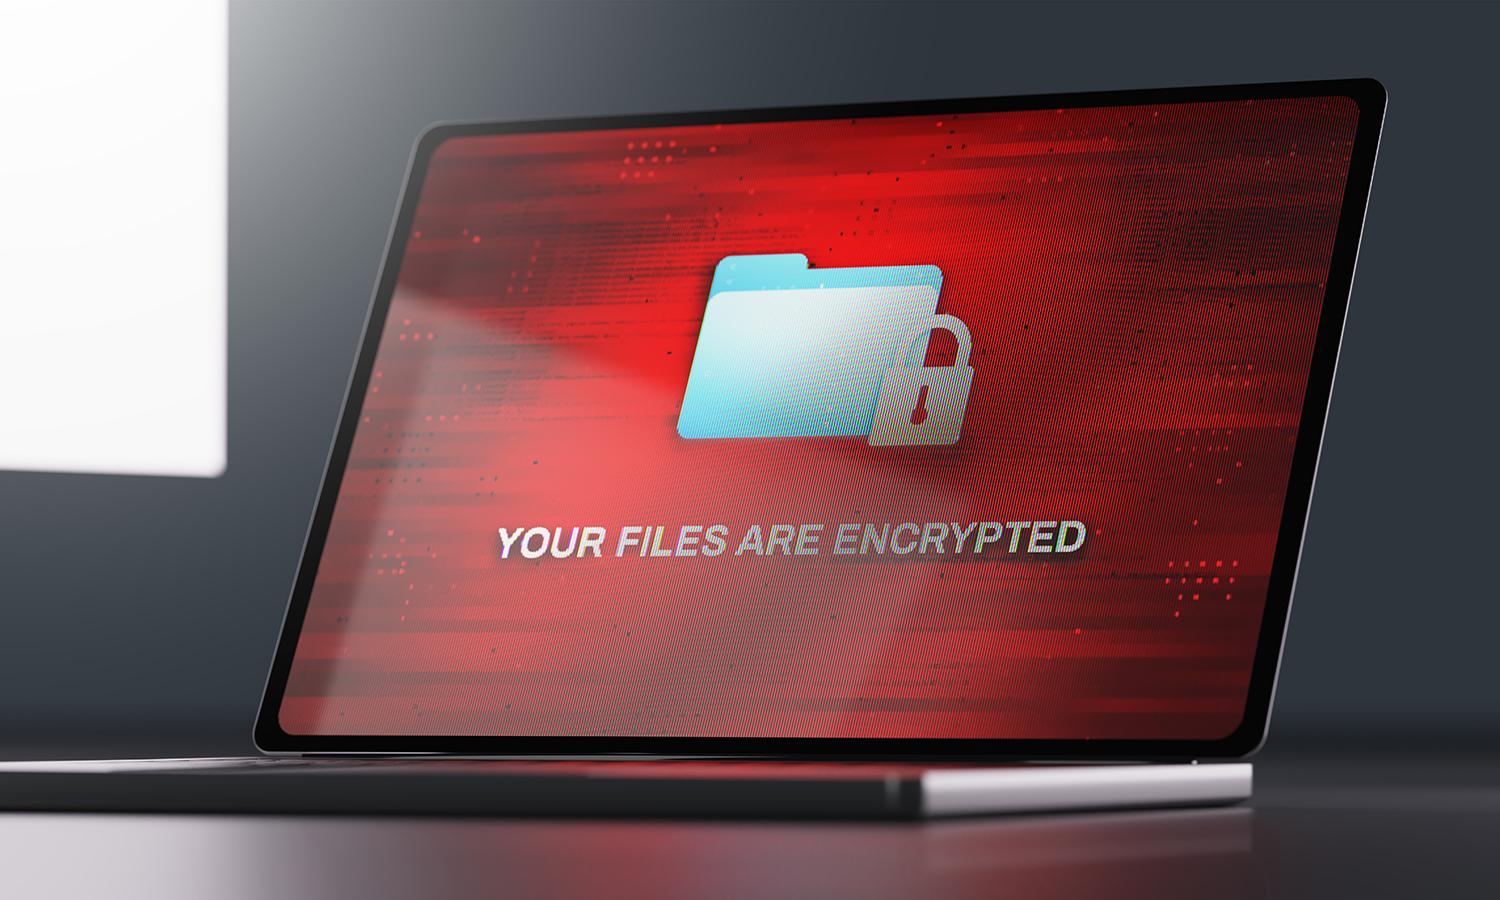 Ransomware on a laptop screen.